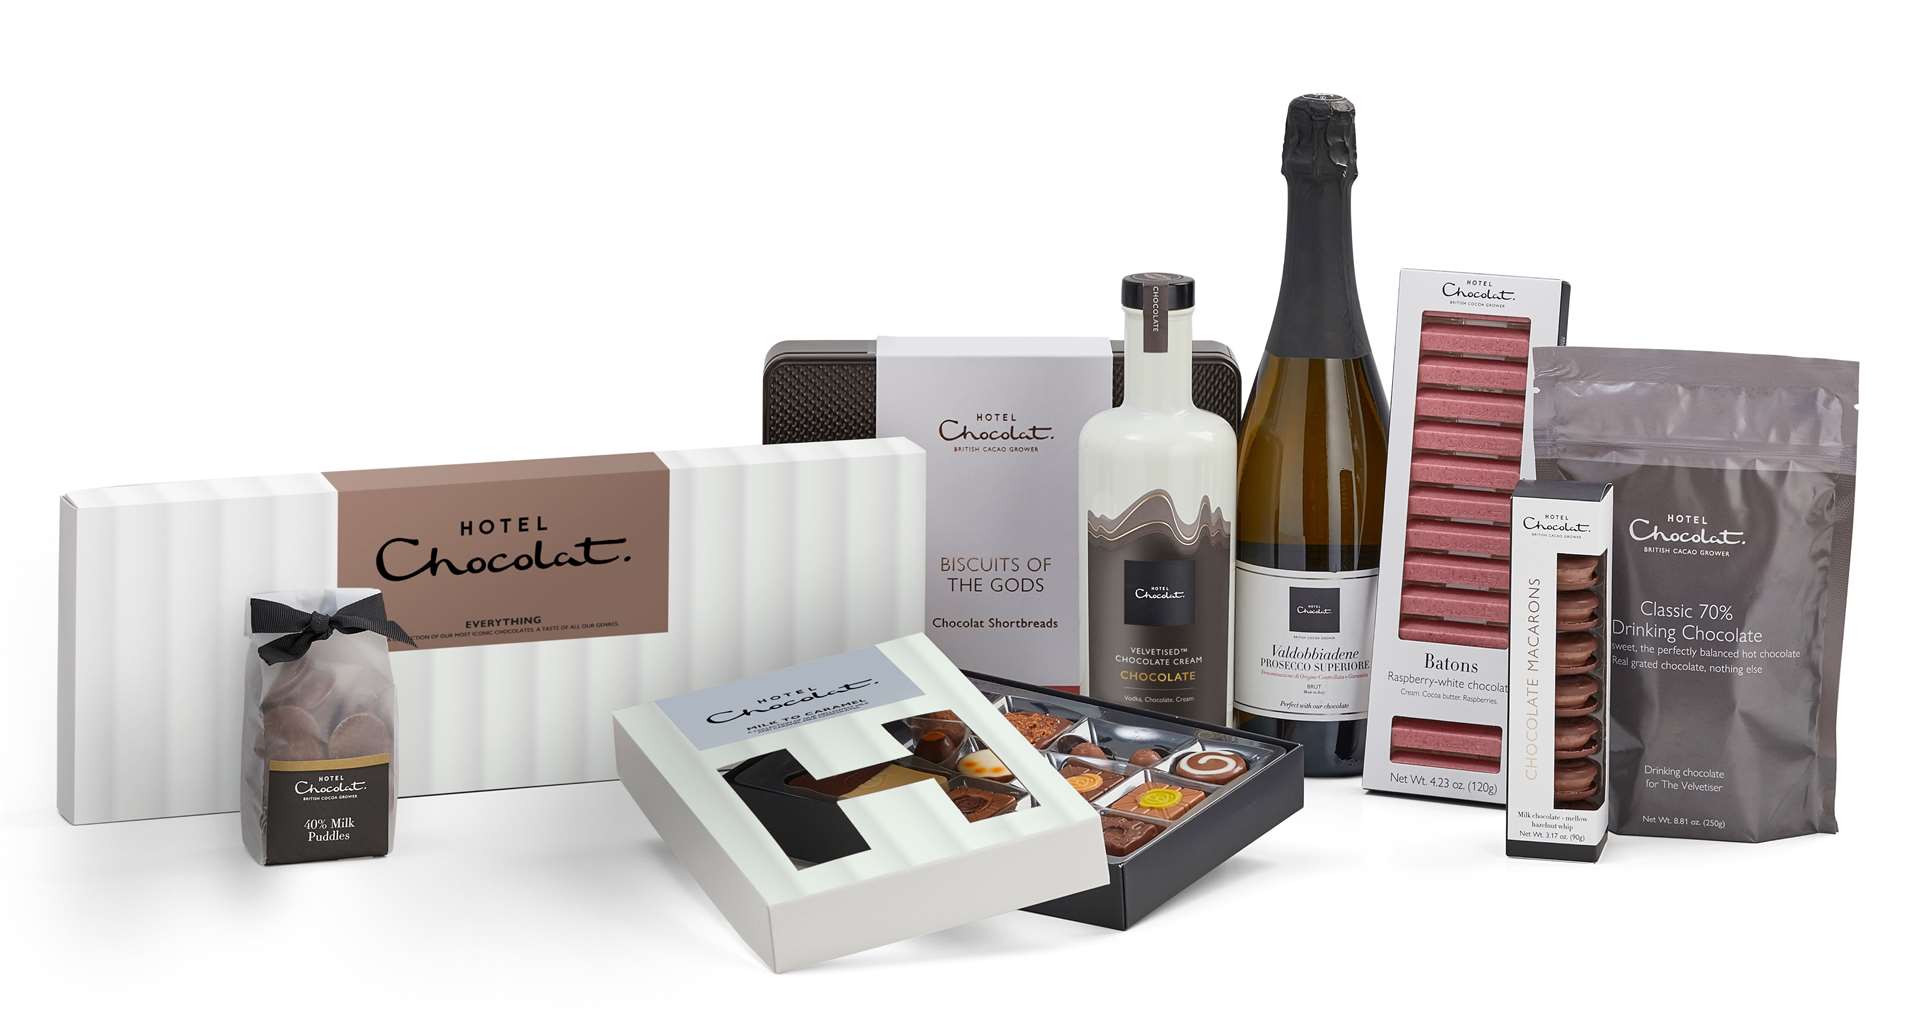 Share the love this Christmas with this Eat, Drink & Be Merry Hamper, £150, Hotel Chocolat